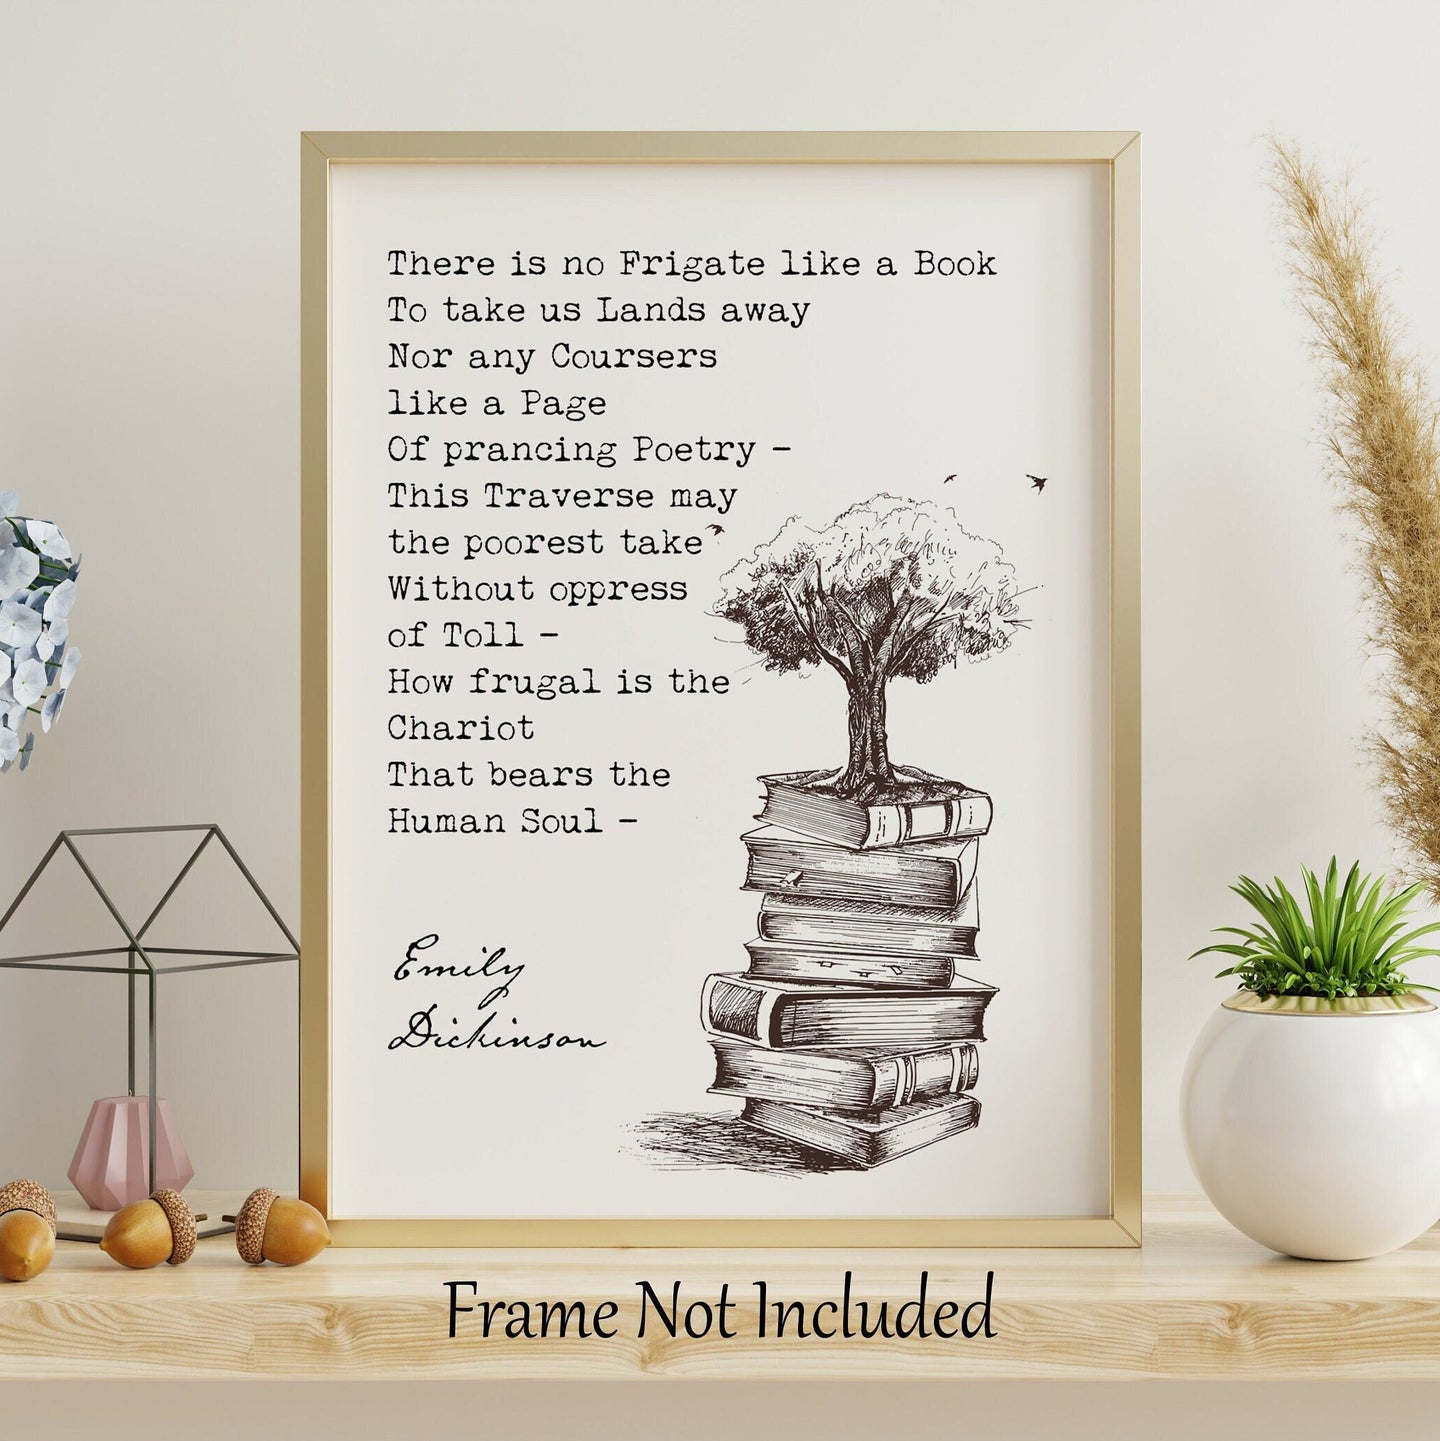 Emily Dickinson Poem Print - There is no Frigate like a Book - Physical Print Without Frame